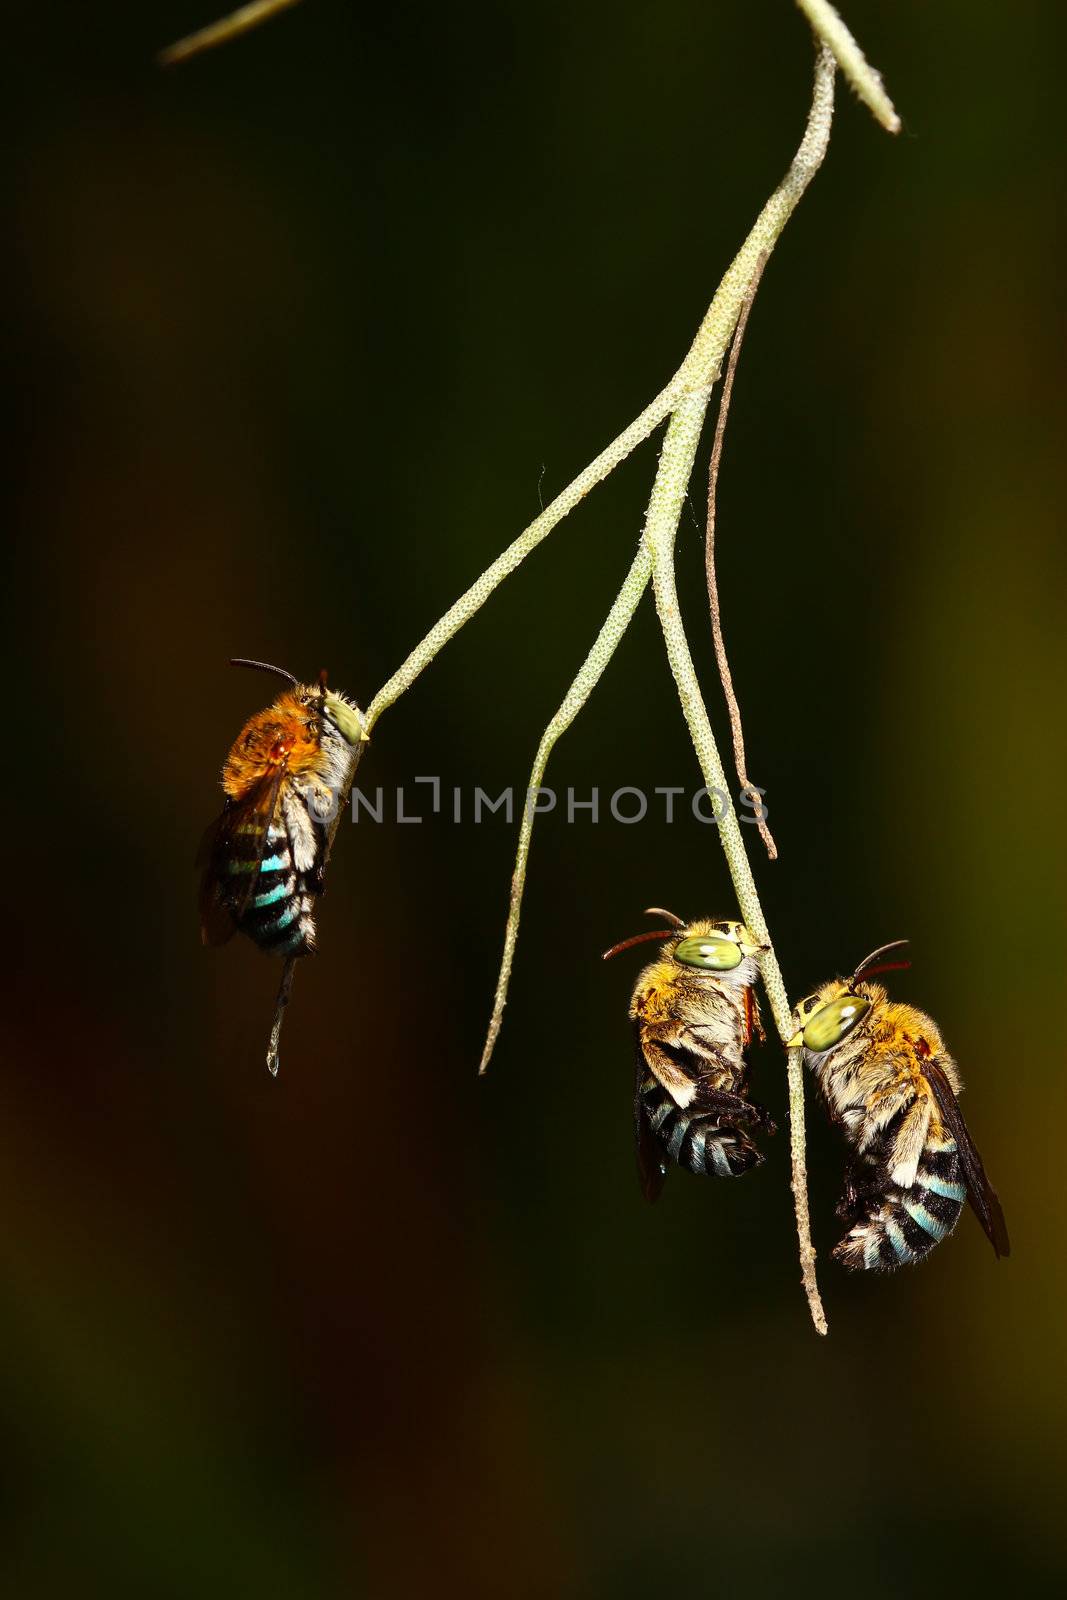 Bees on a branch. by bajita111122